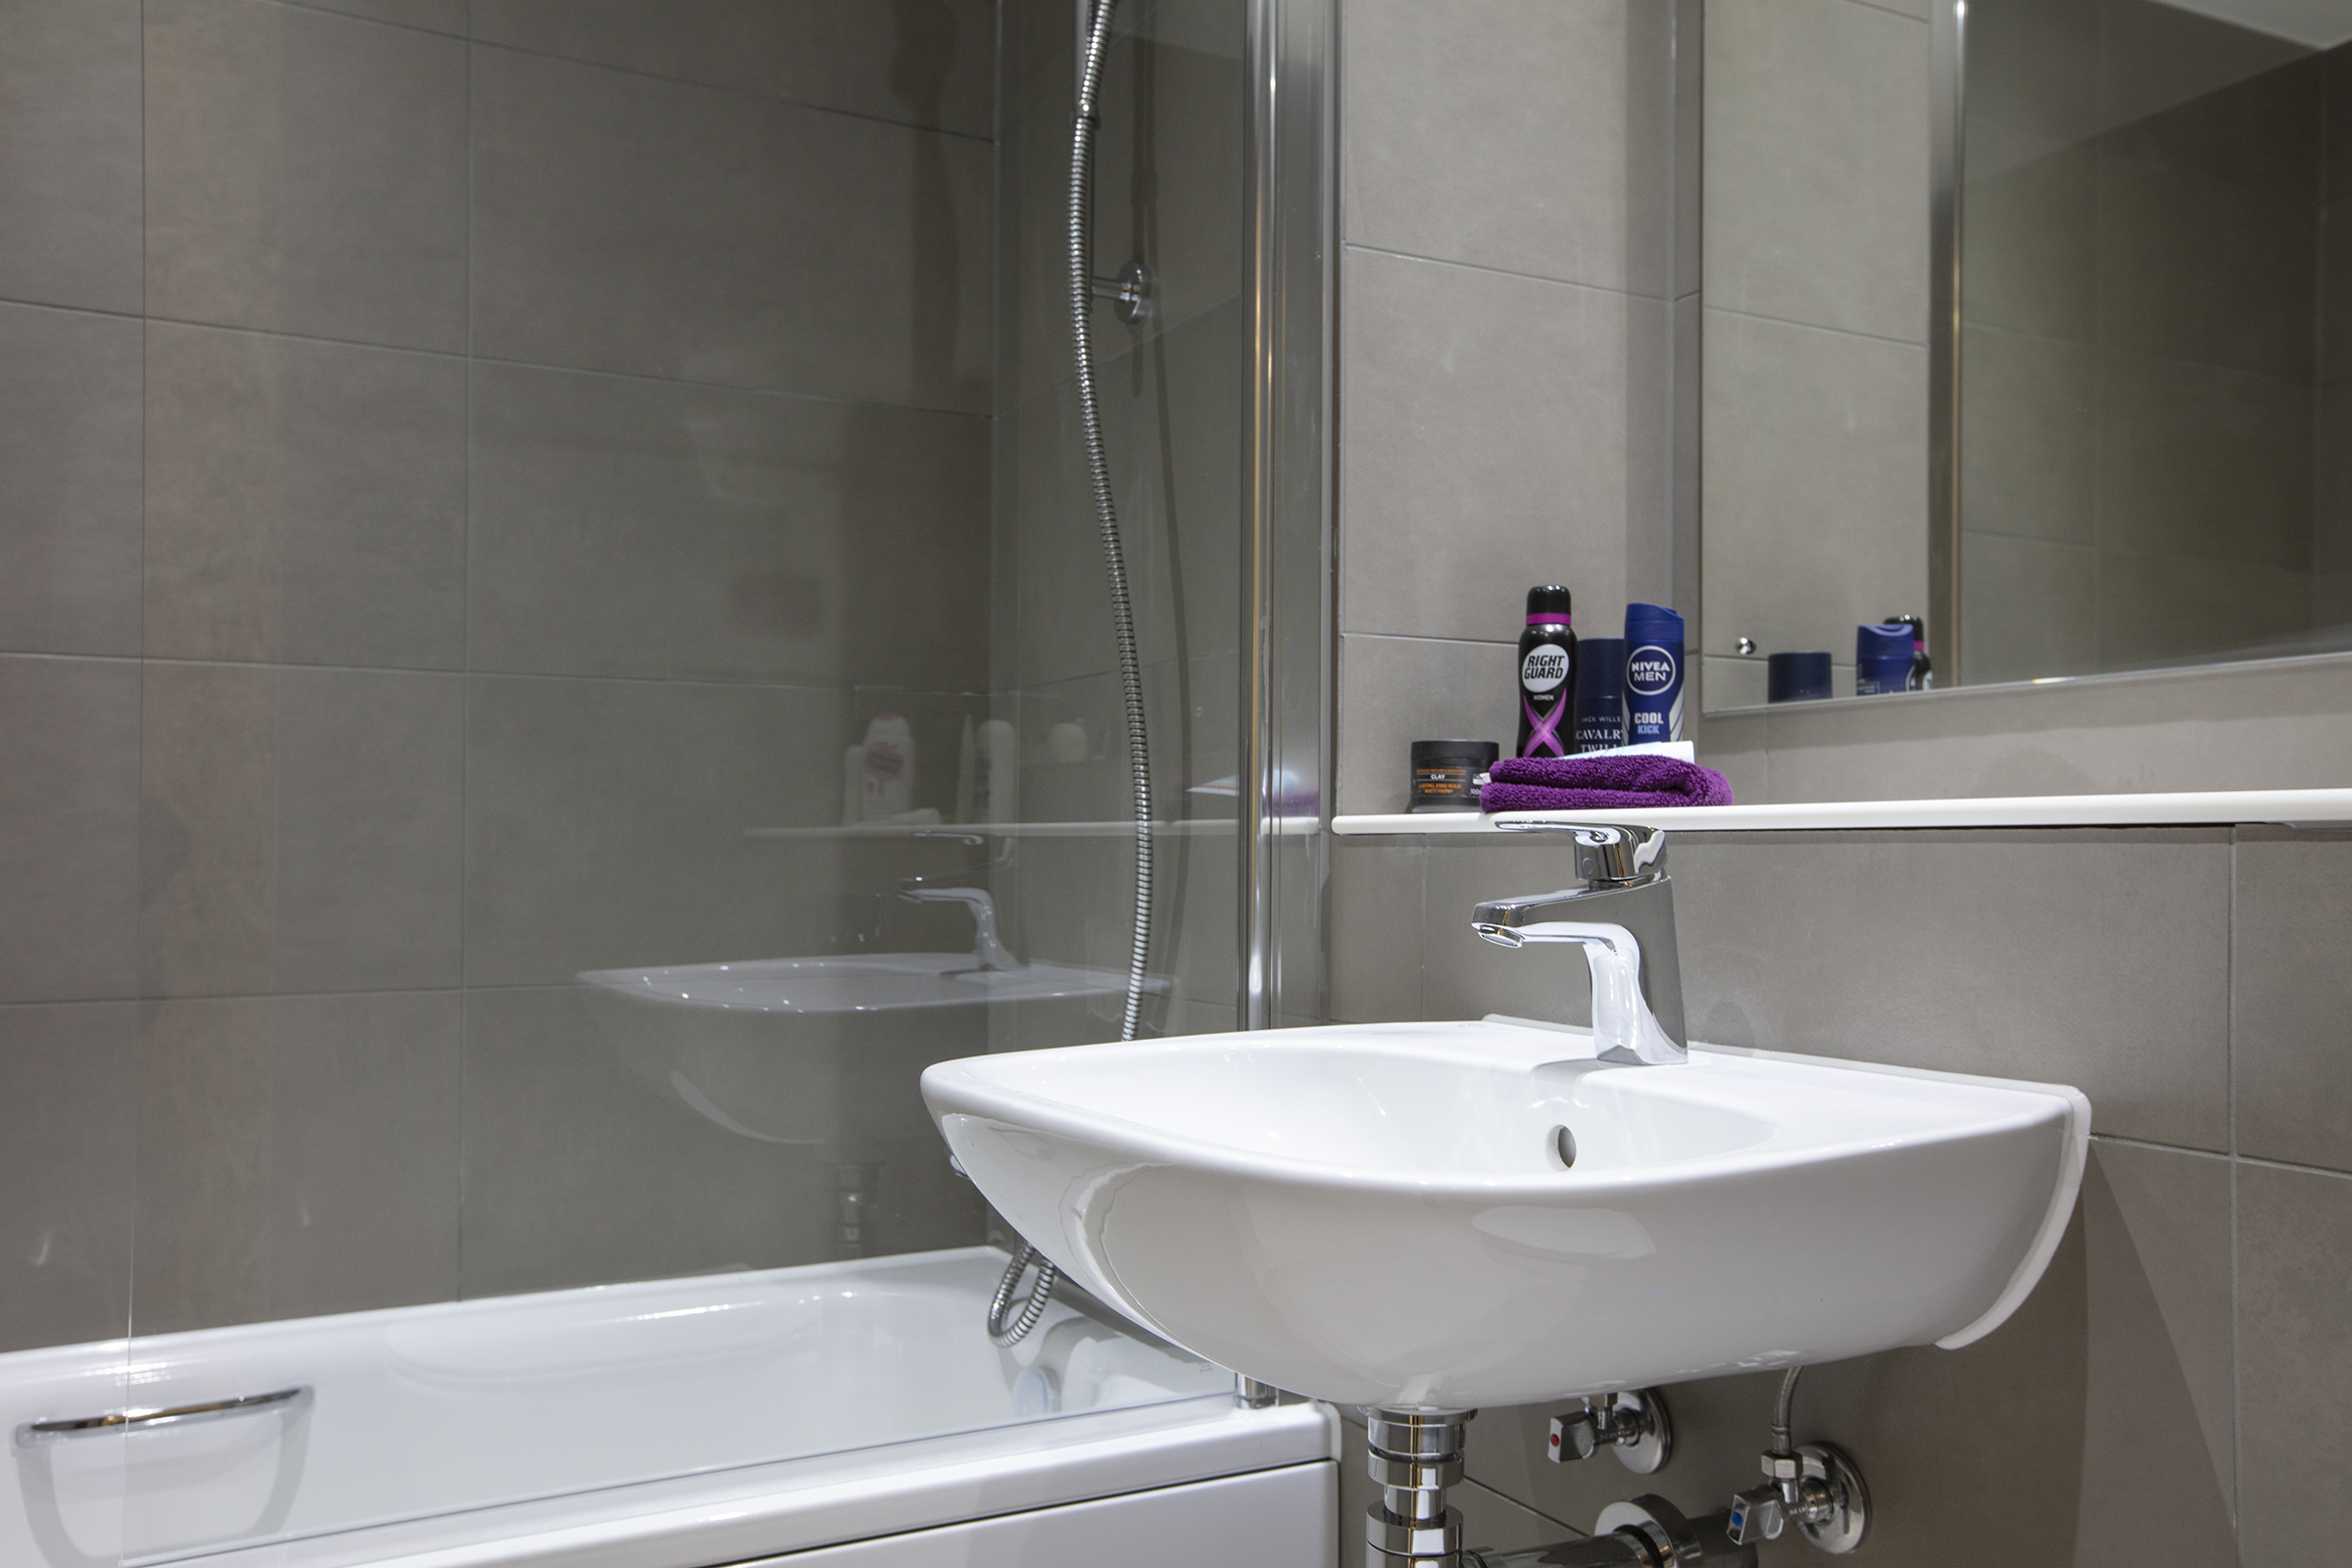 Offsite Solutions has won the bathroom popds contract